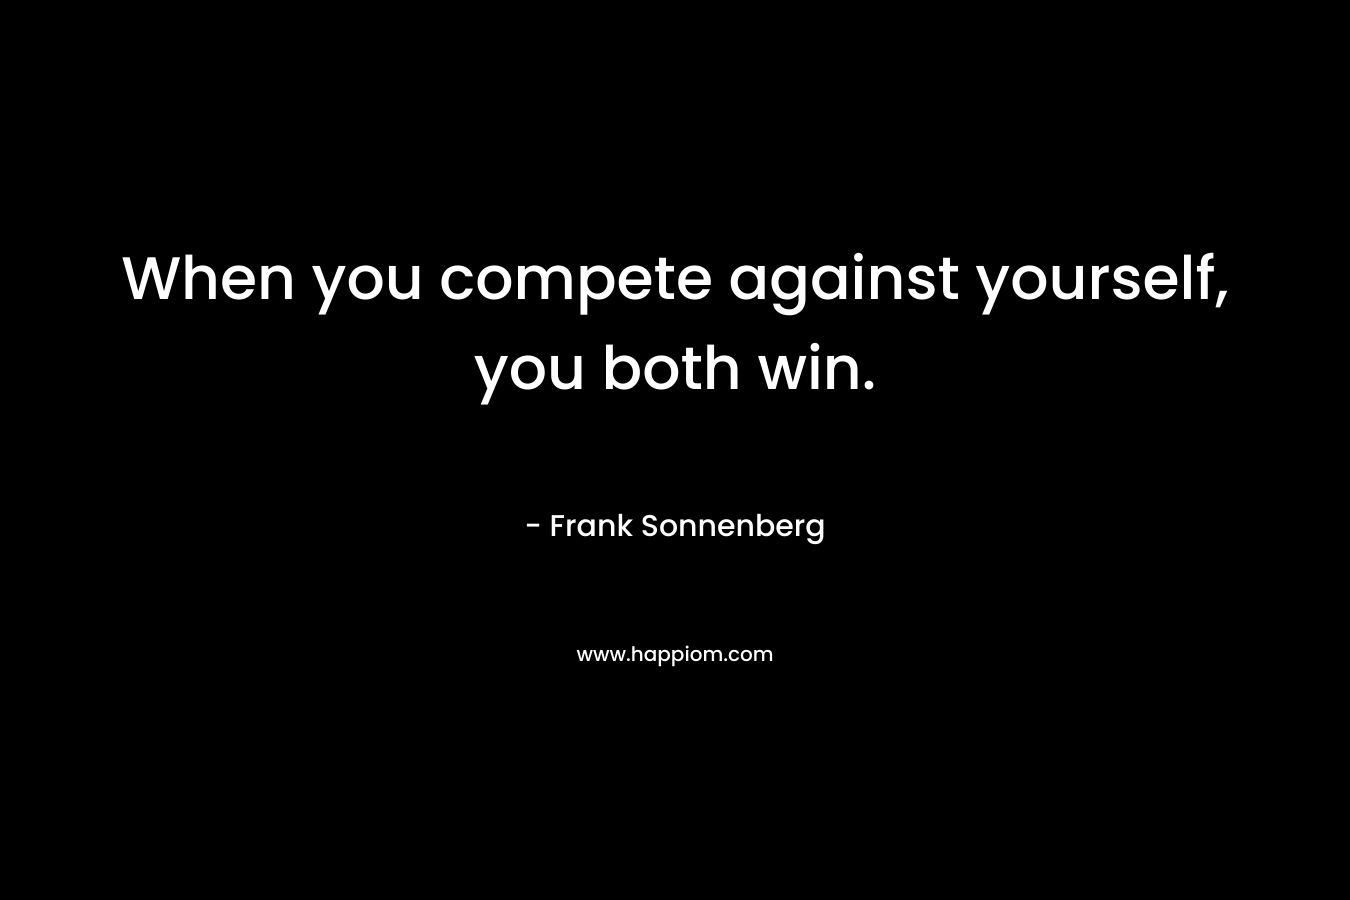 When you compete against yourself, you both win.